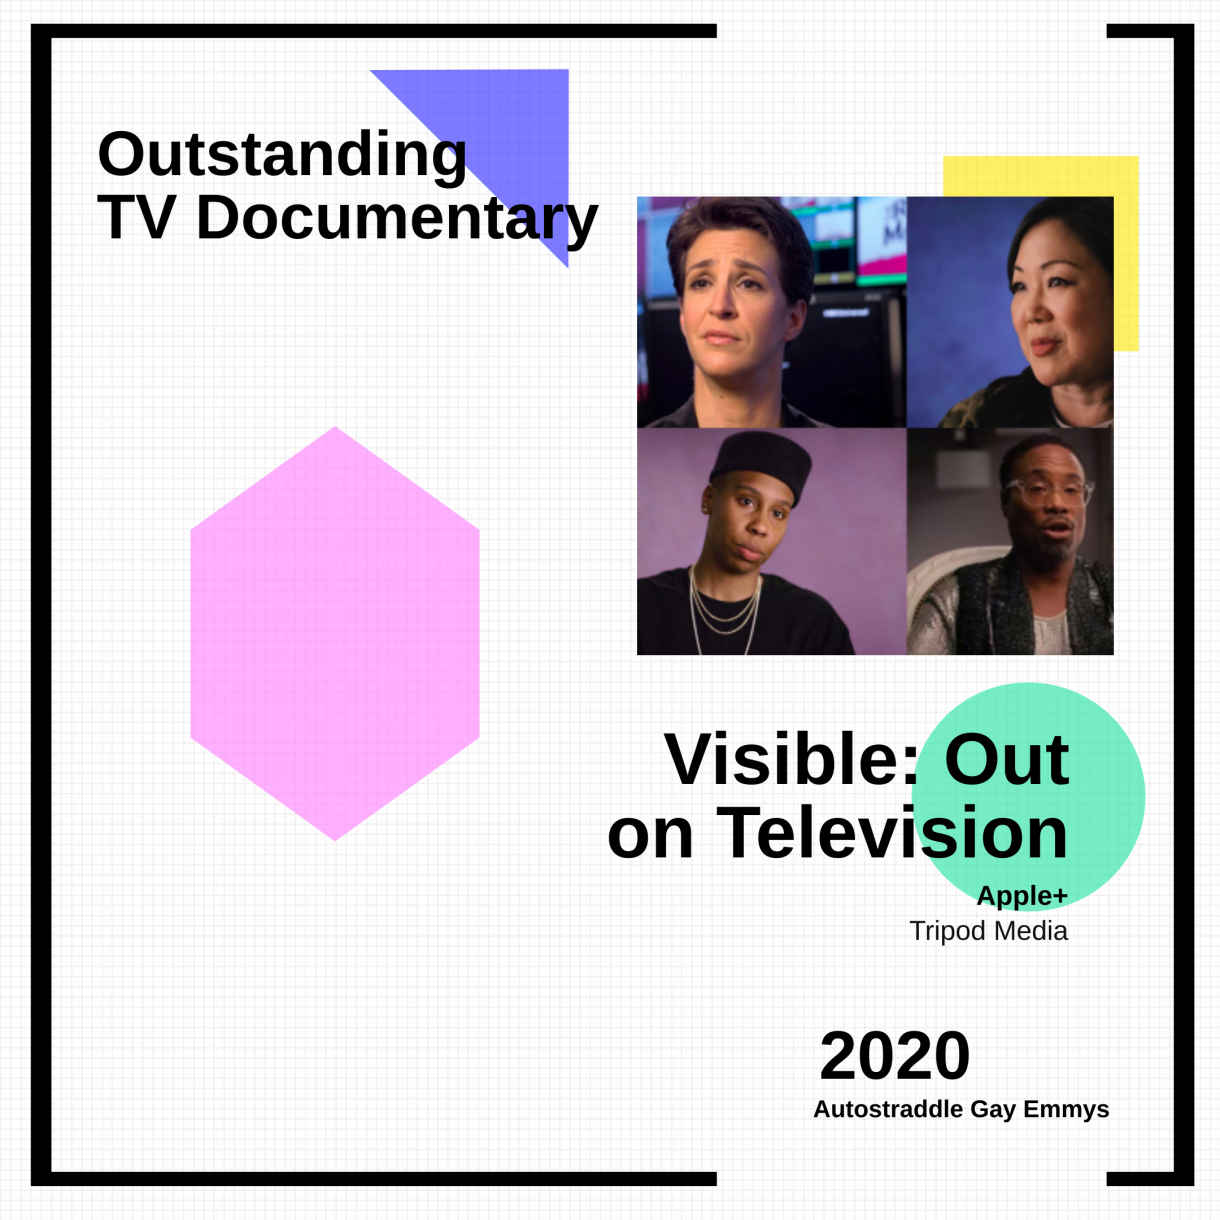 graphic announcing Outstanding TV Documentary, "Visible: Out on Television"